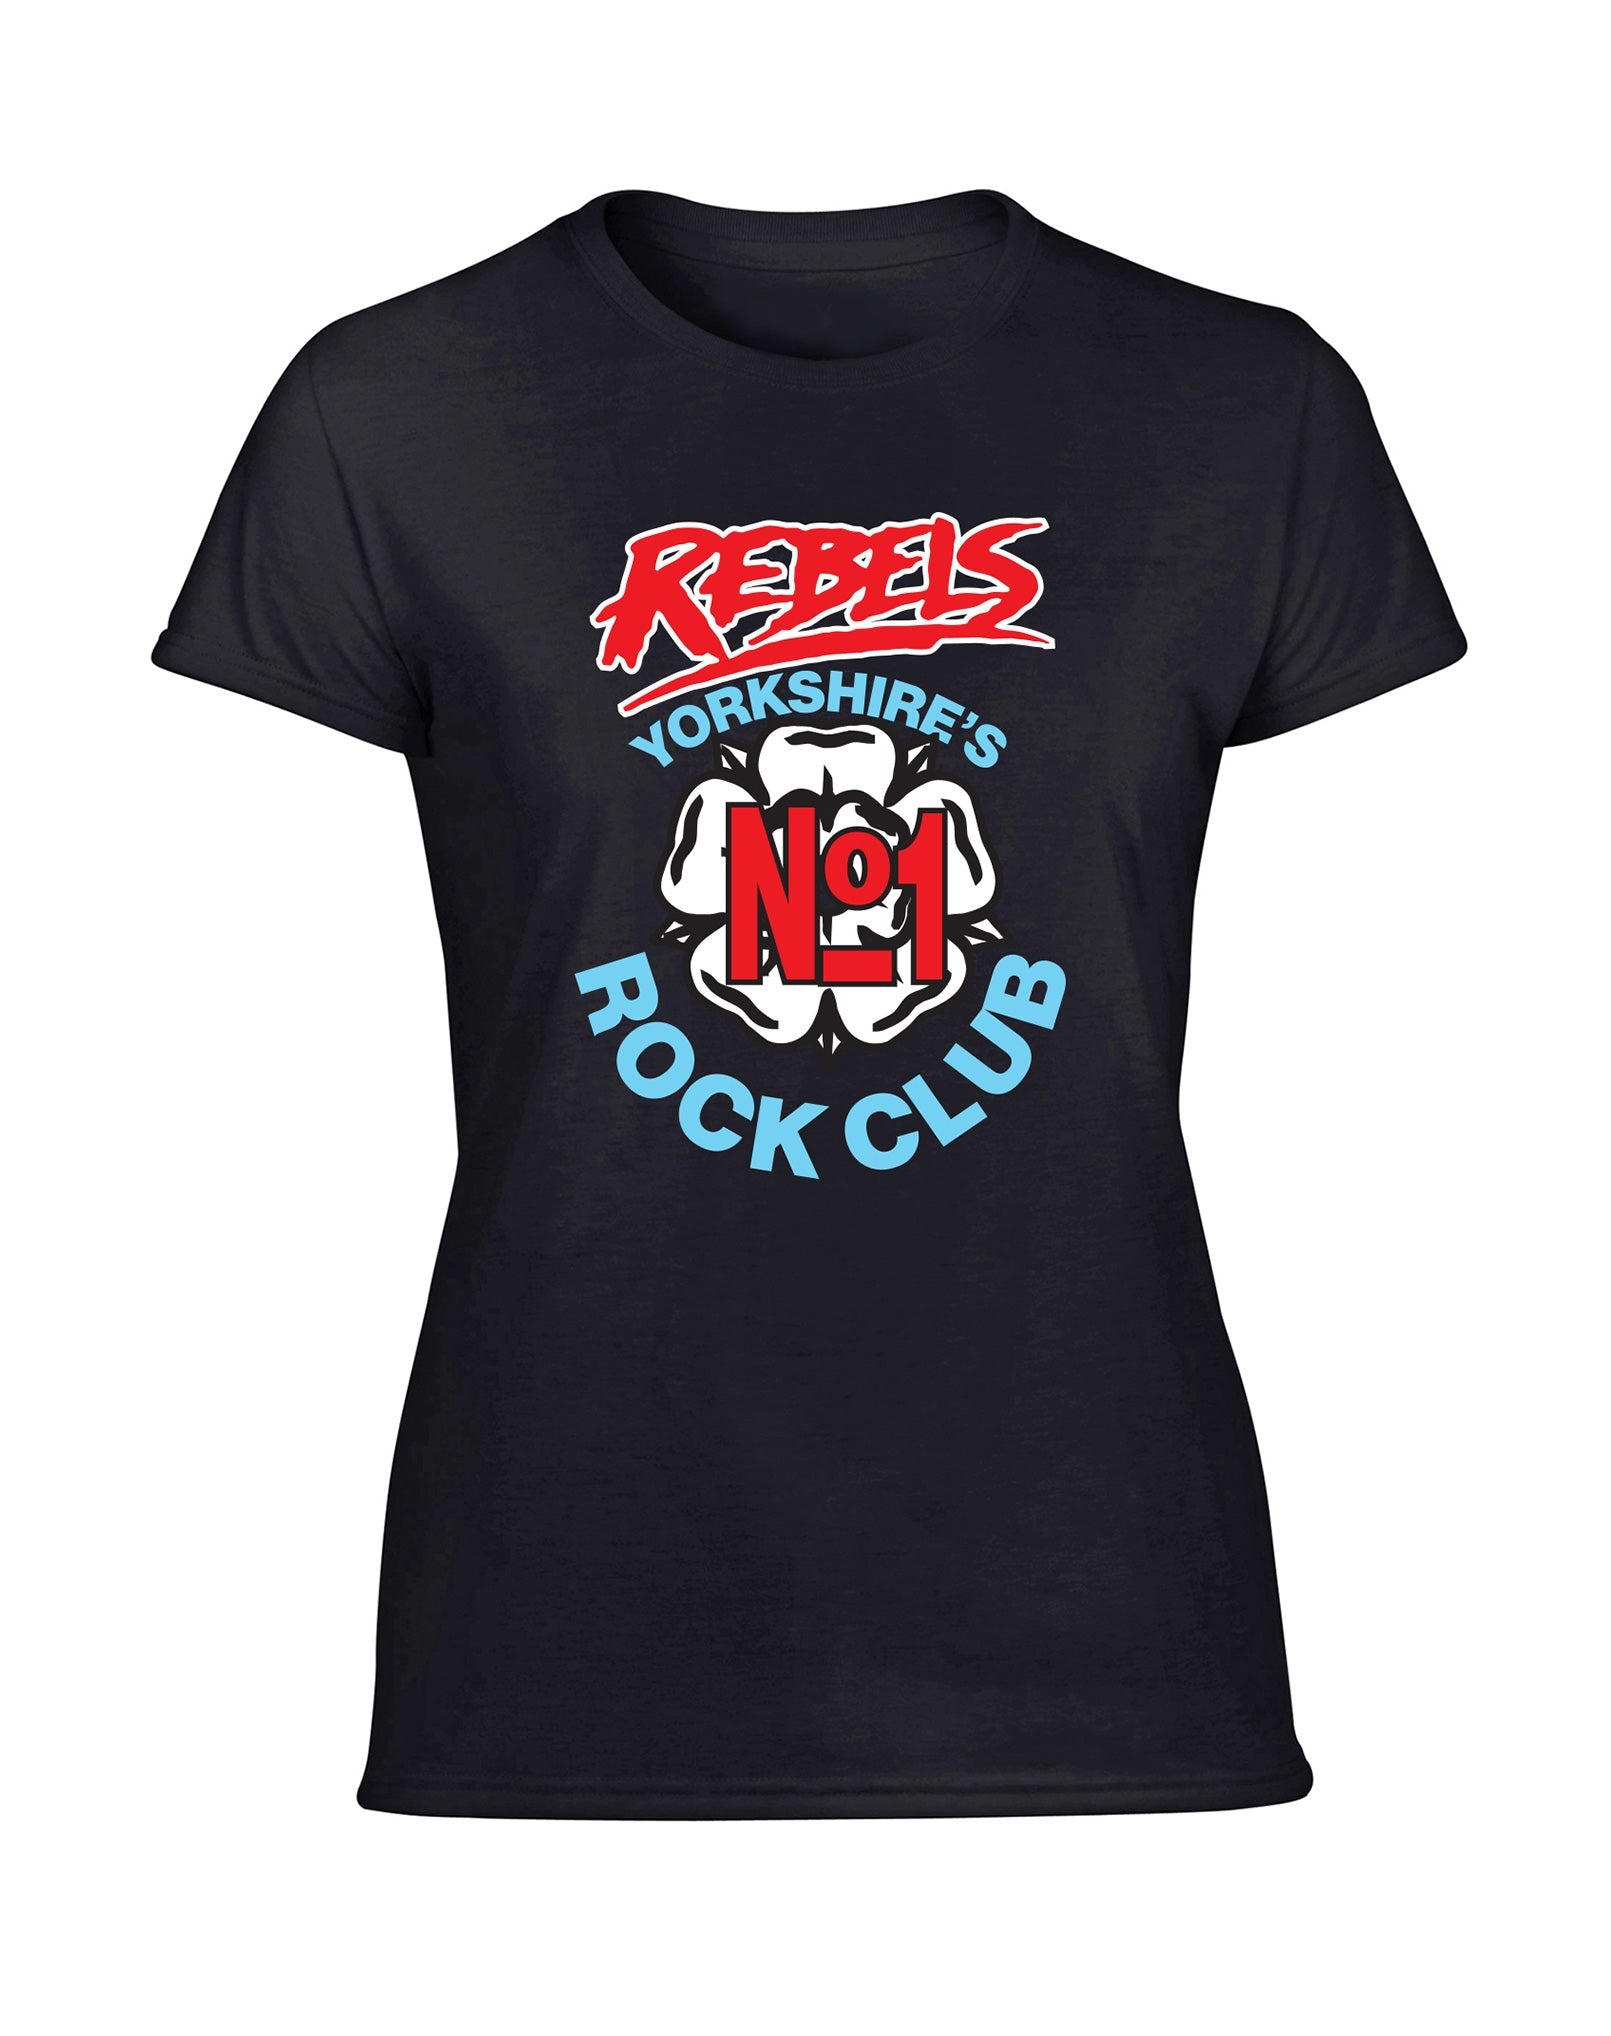 Rebels No. 1 rock club ladies fit T-shirt - various colours - Dirty Stop Outs